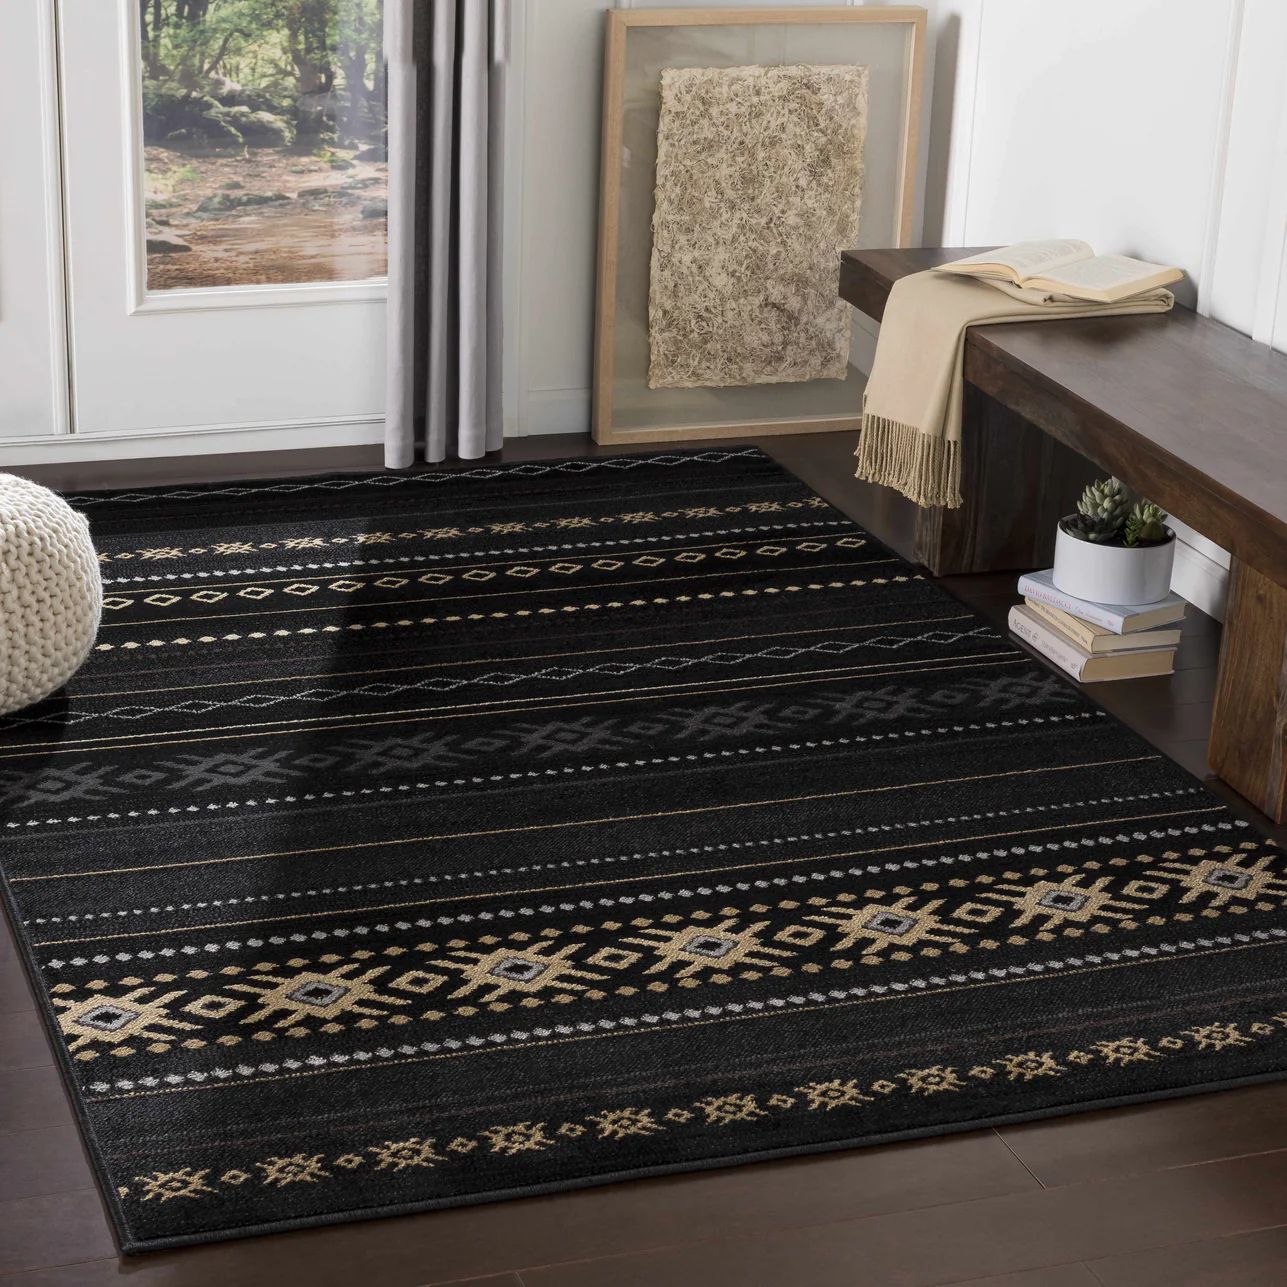 Fogertown Area Rug | Boutique Rugs